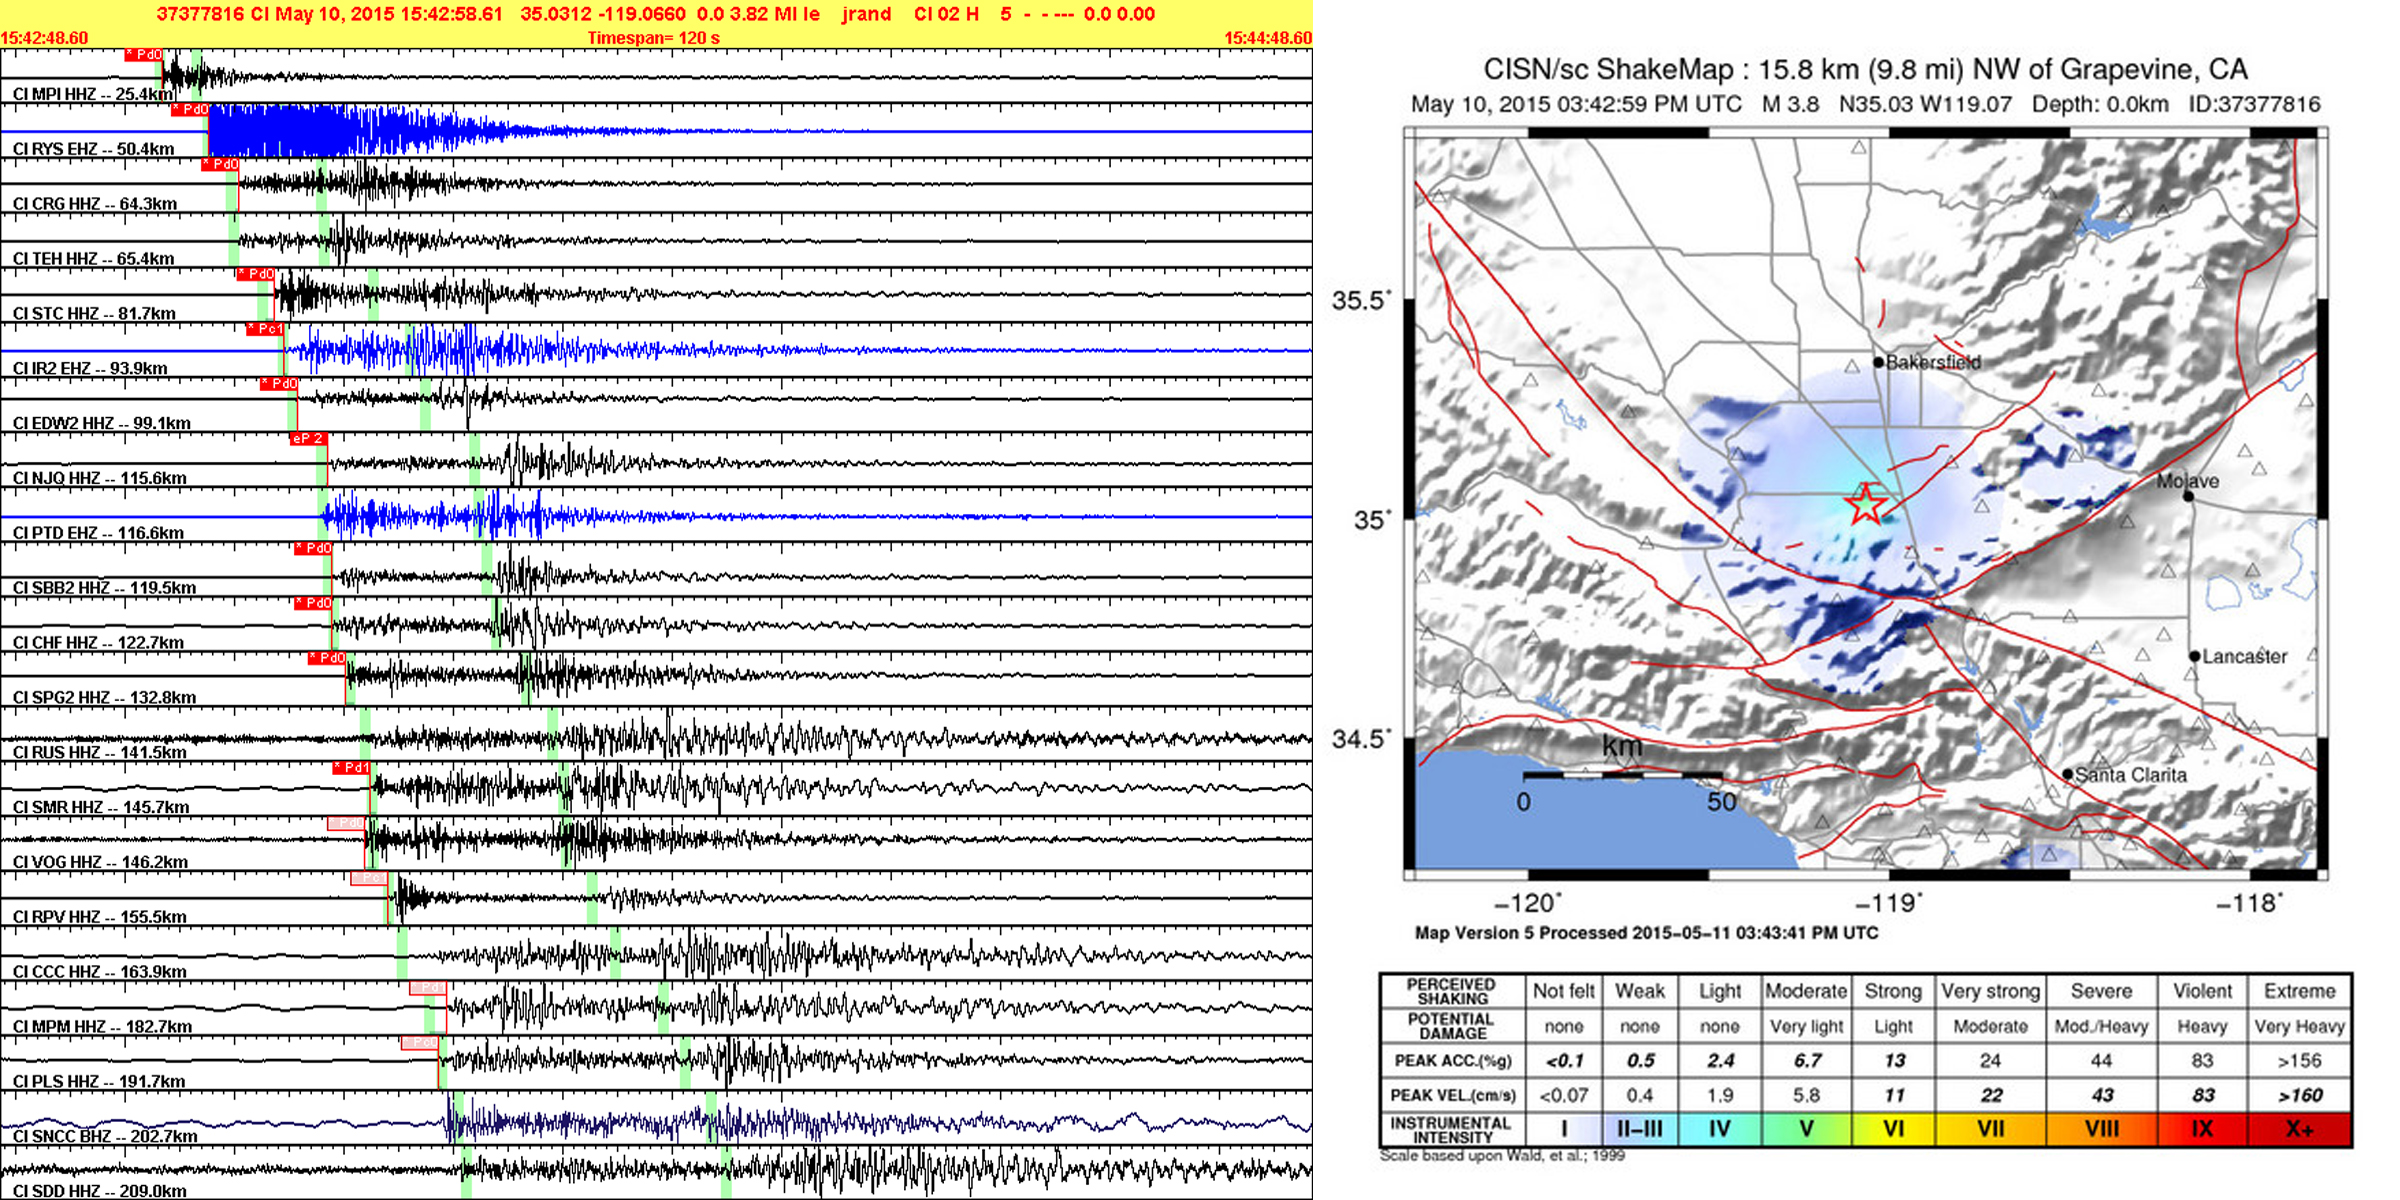 Left: Seismic waveforms collected from the SCSN and analyzed, determining event information. Right: Shakemap based on analyzed event data.